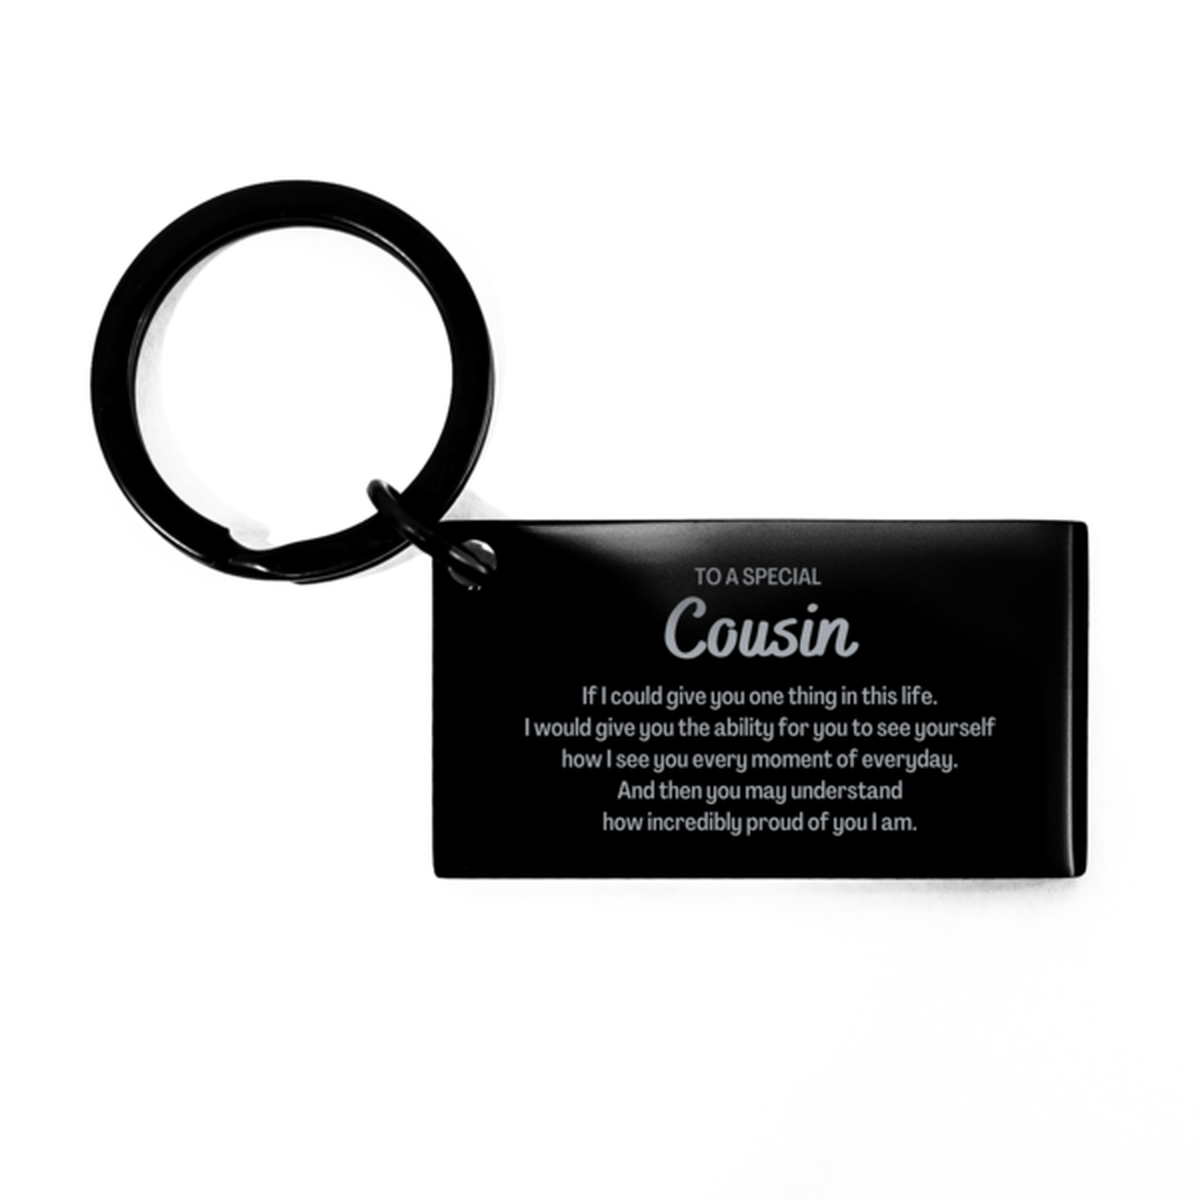 To My Cousin Keychain, Gifts For Cousin Engraved, Inspirational Gifts for Christmas Birthday, Epic Gifts for Cousin To A Special Cousin how incredibly proud of you I am